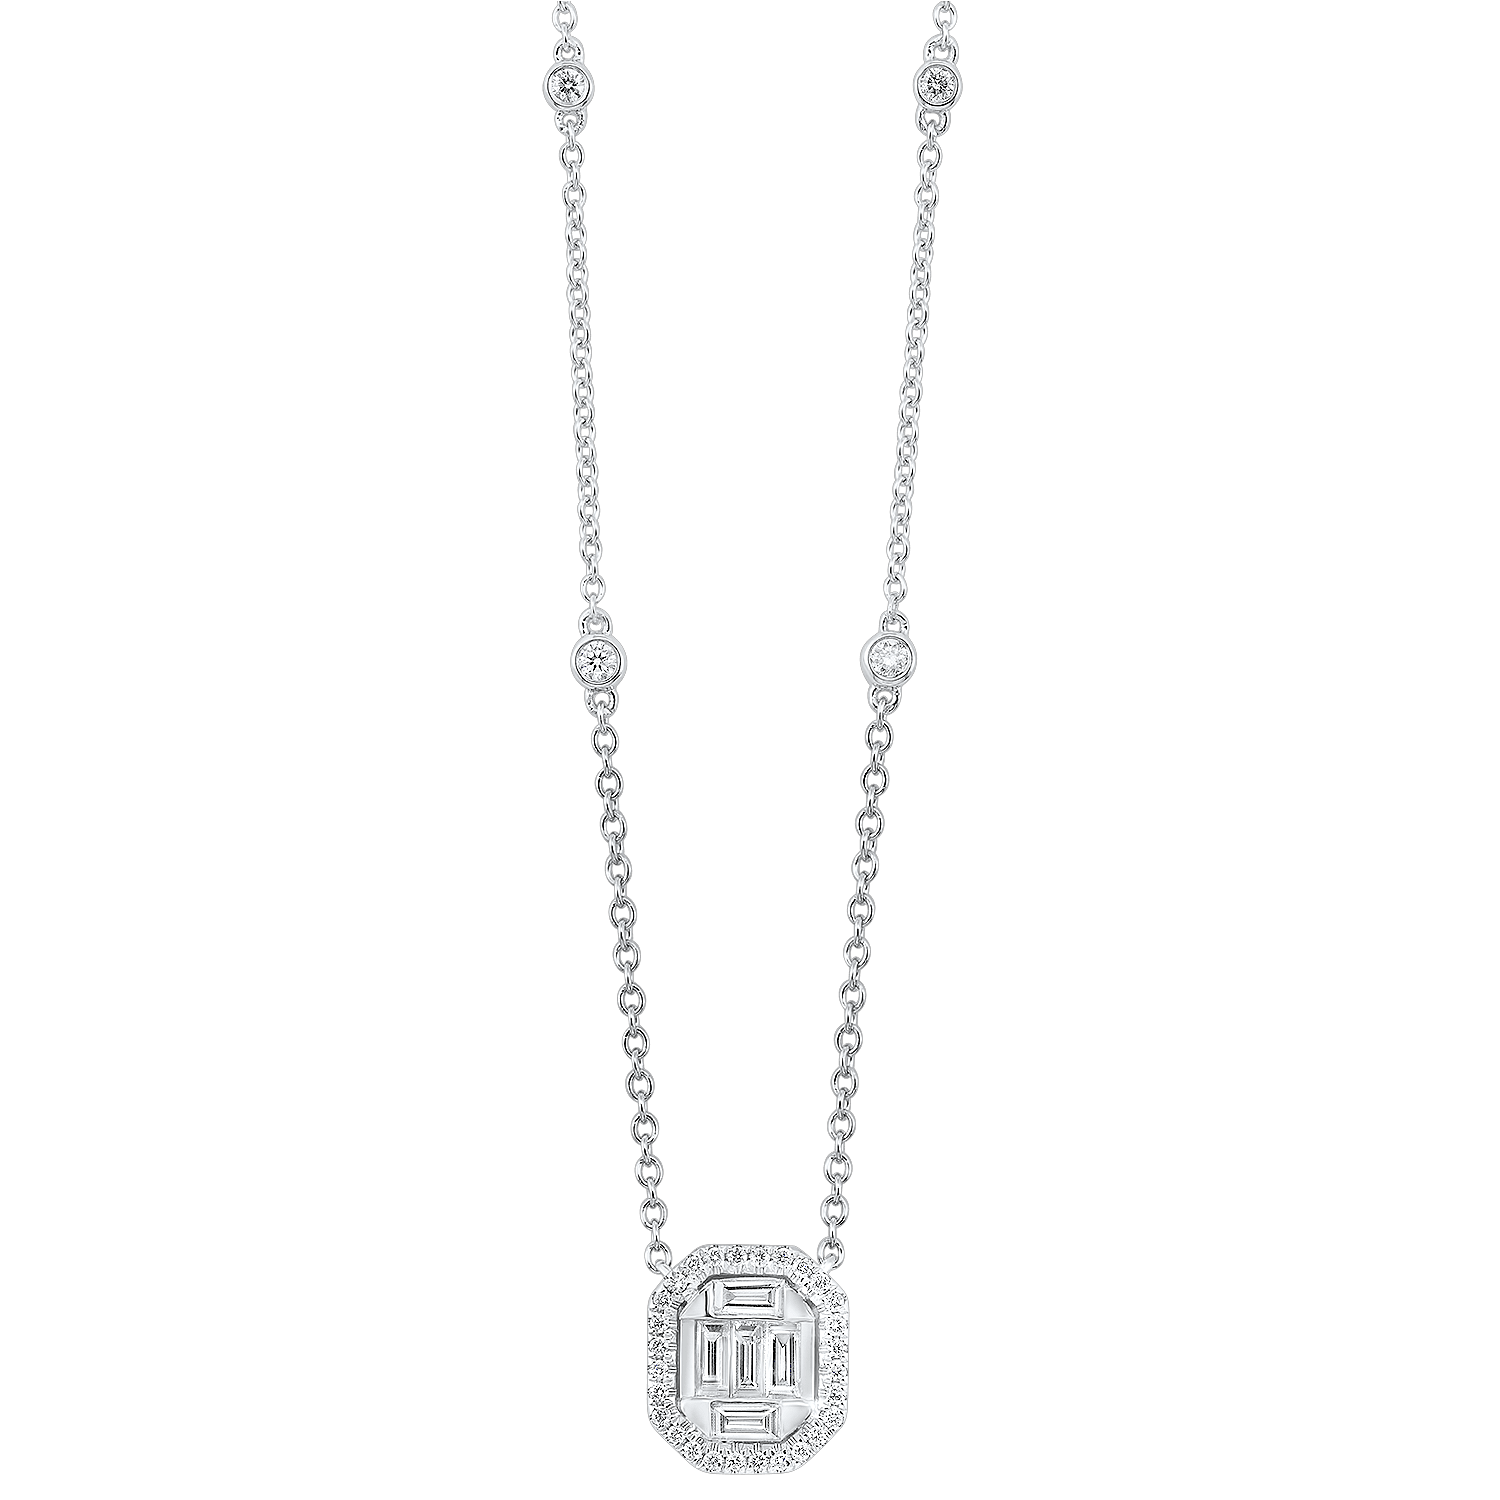 BW James Jewelers Necklace 16 Page Christmas Catalog Offer 14K diamond necklace 1/2ctw